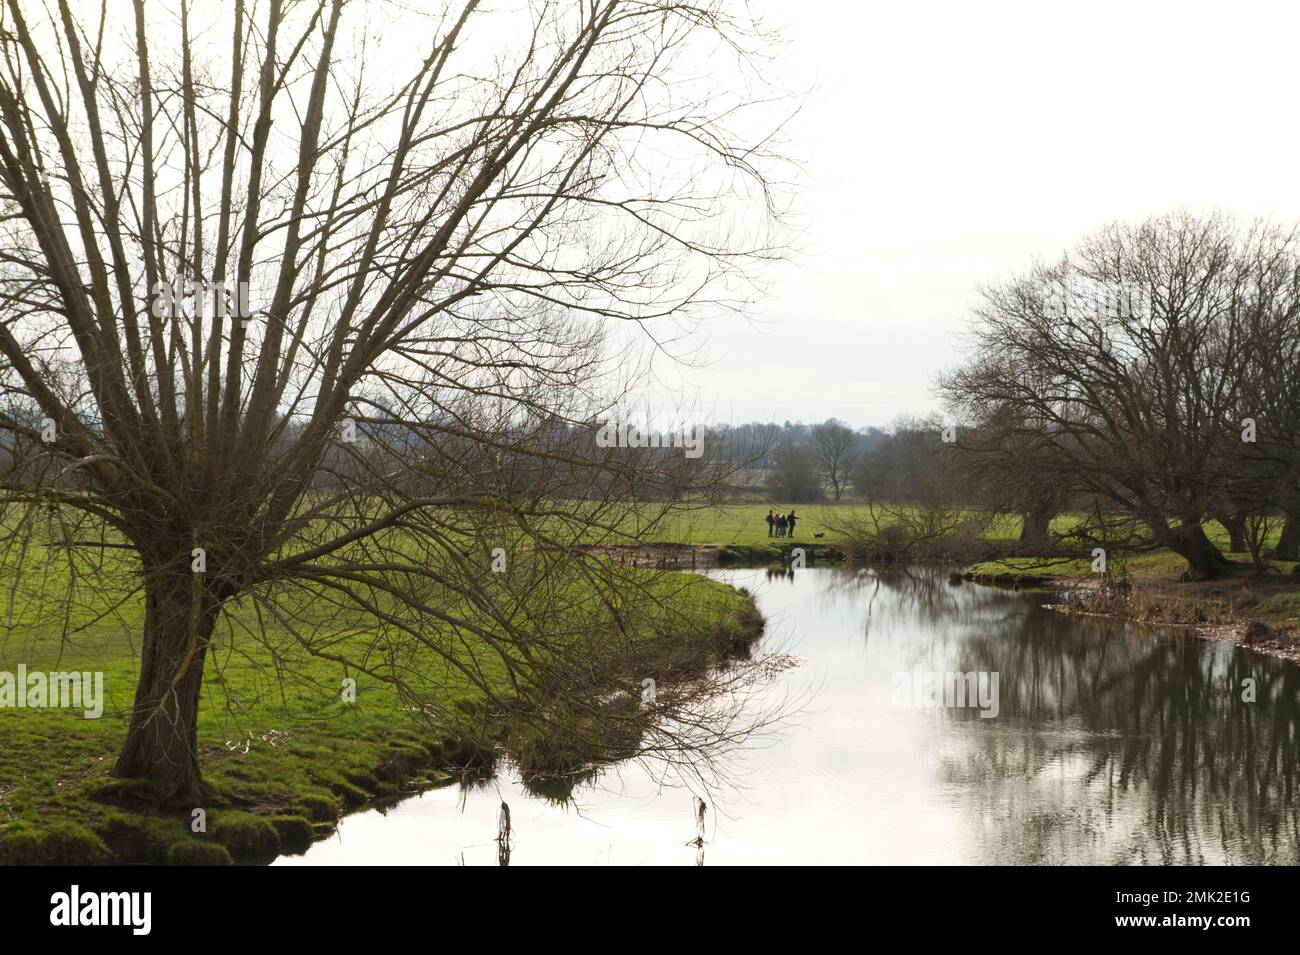 View of the River Stour in the Dedham Vale on the Essex and Suffolk border. Stock Photo